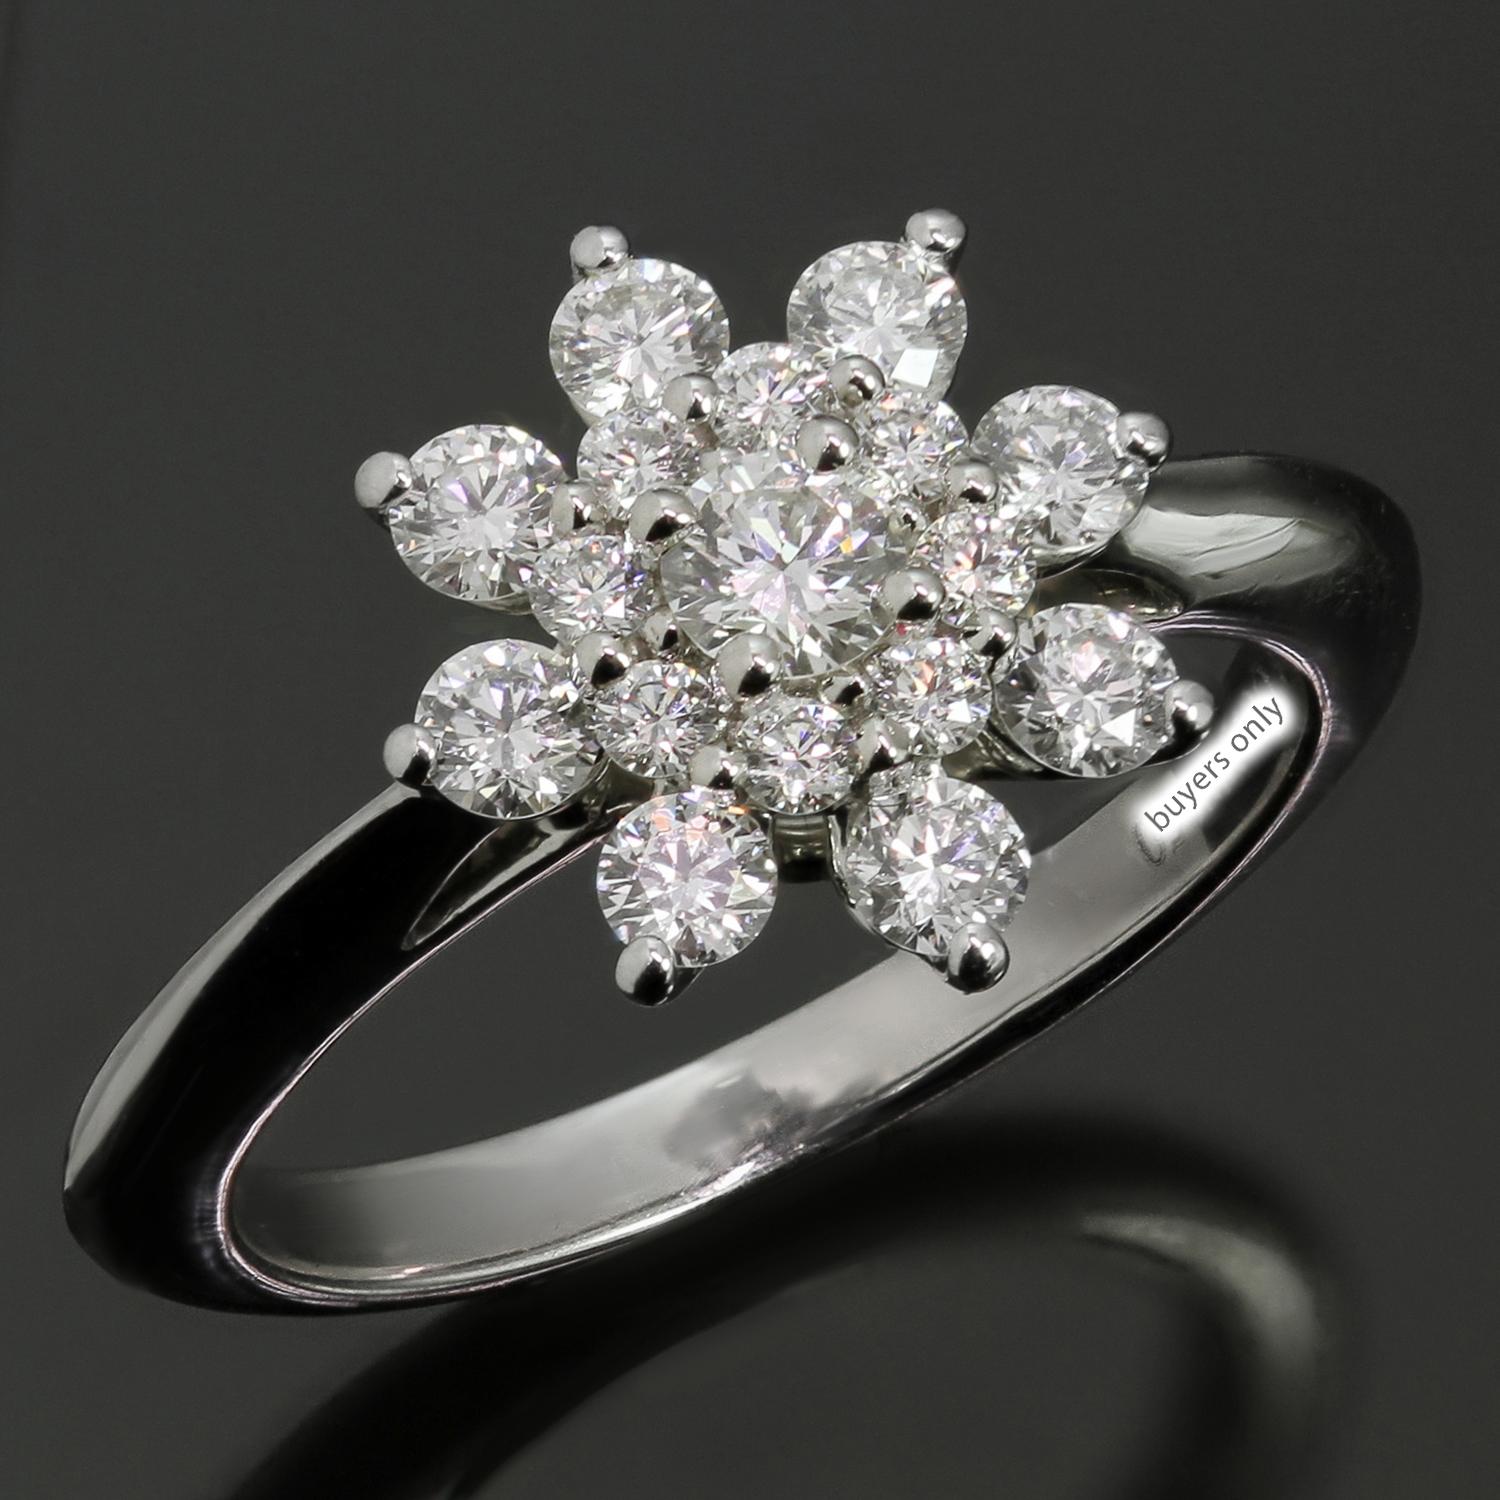 This stunning Tiffany & Co. ring features a delicate flower design crafted in 950 platinum and set with round brilliant F-G VVS2-VS1 diamonds weighing an estimated 0.80 carats. Made in United States circa 2010s. Measurements: 0.43